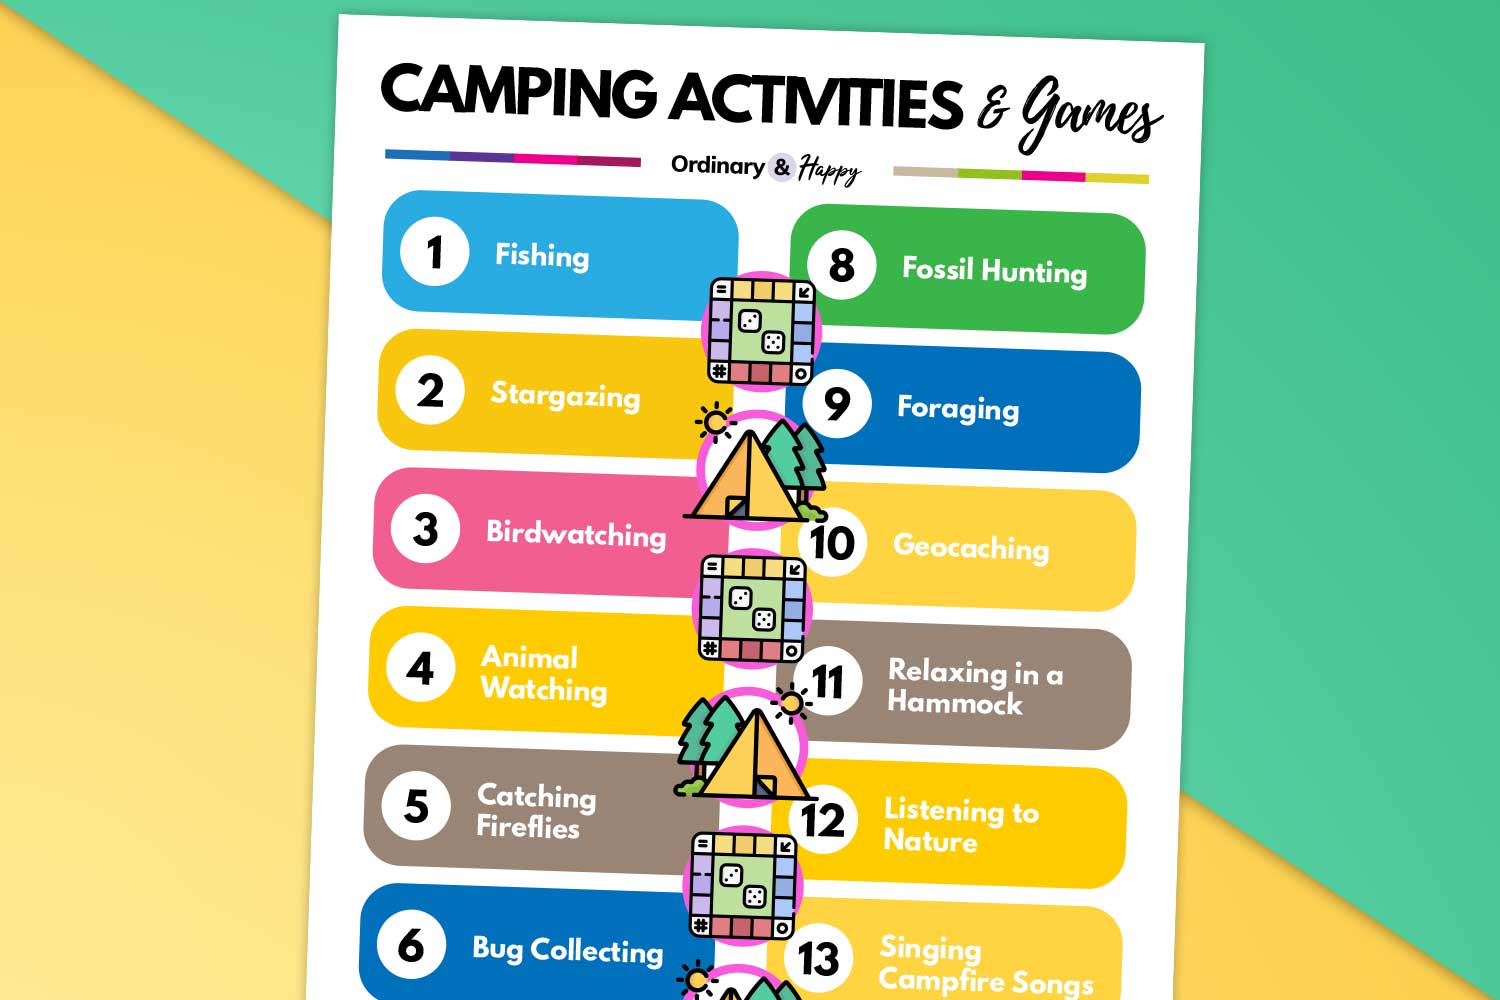 40+ Camping Activities and Games for a Super Fun Weekend